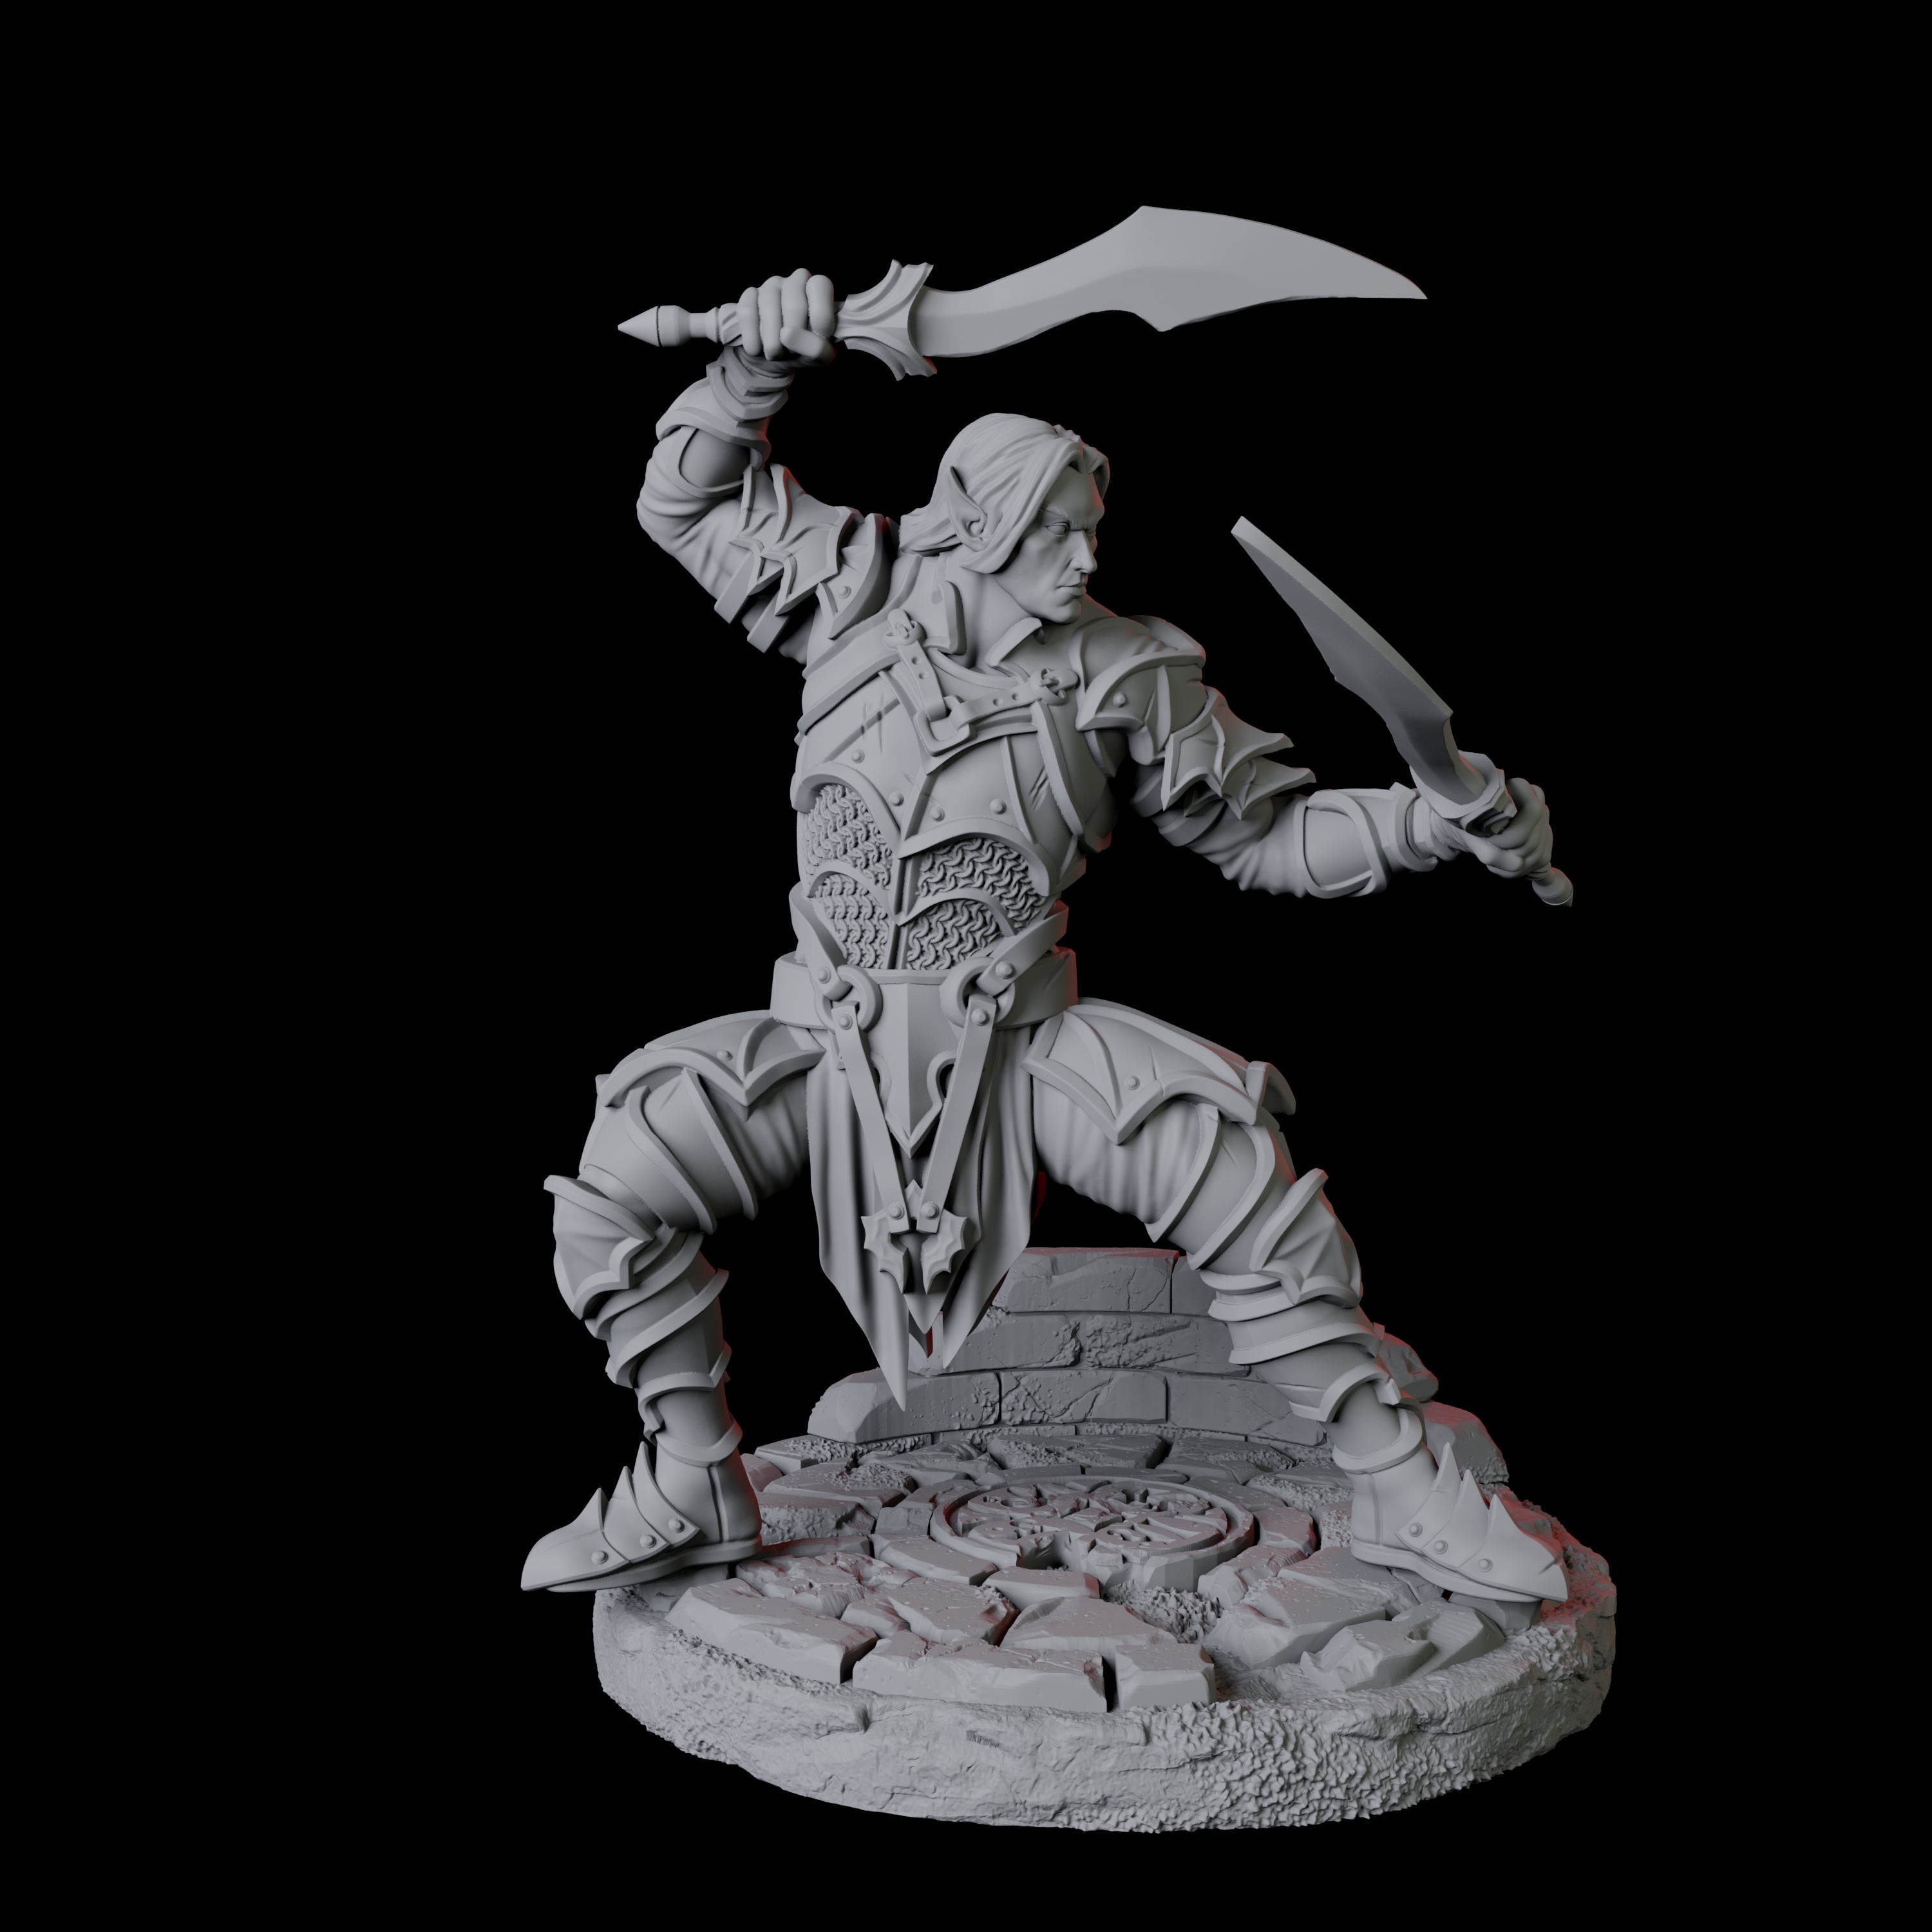 Two Dual Wielding Swordsmen Miniature for Dungeons and Dragons, Pathfinder or other TTRPGs